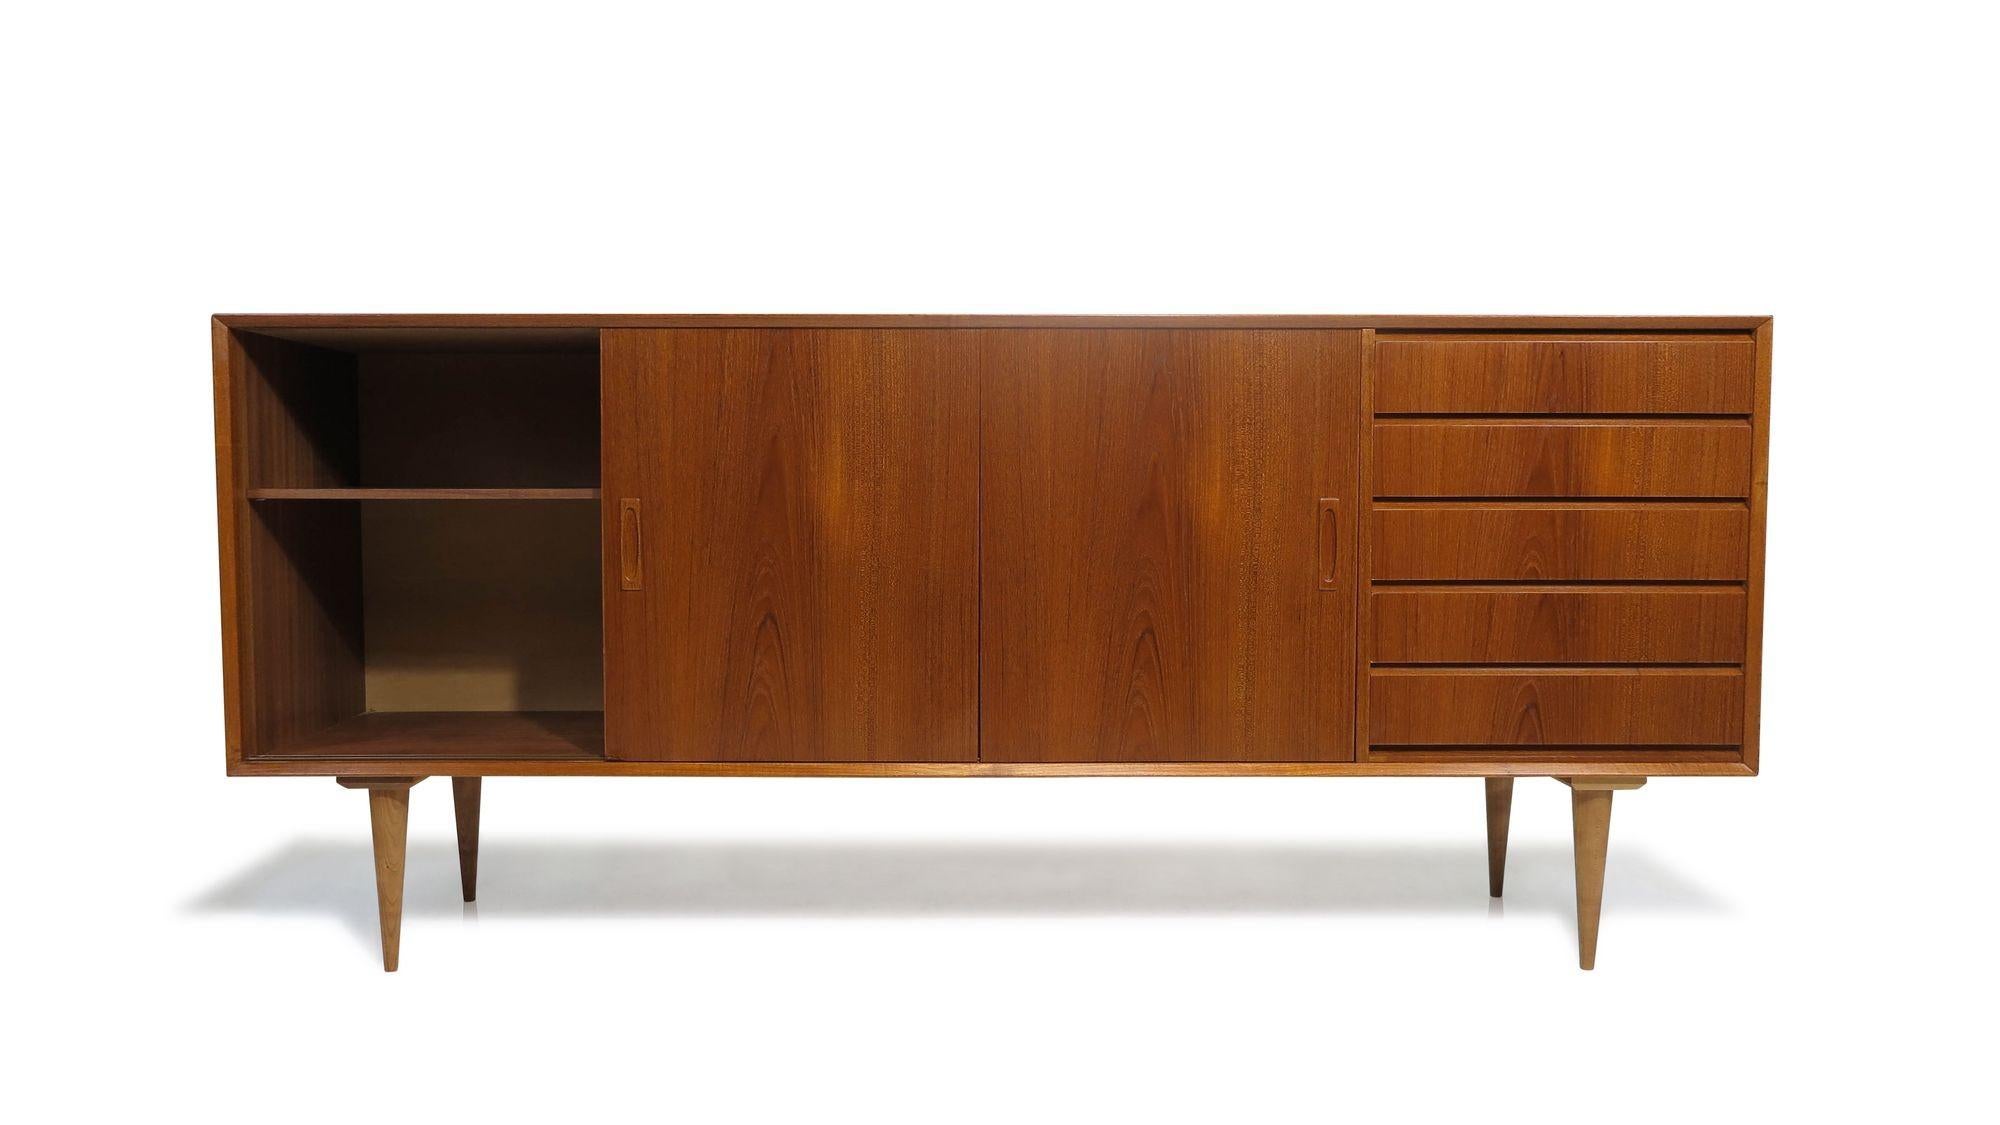 Mid-century teak credenza finely crafted featuring mitered corners, a series of four drawers, and three sliding doors. The sliding doors showcase old-growth teak grain patterns across the front, opening to reveal an interior with adjustable shelves.